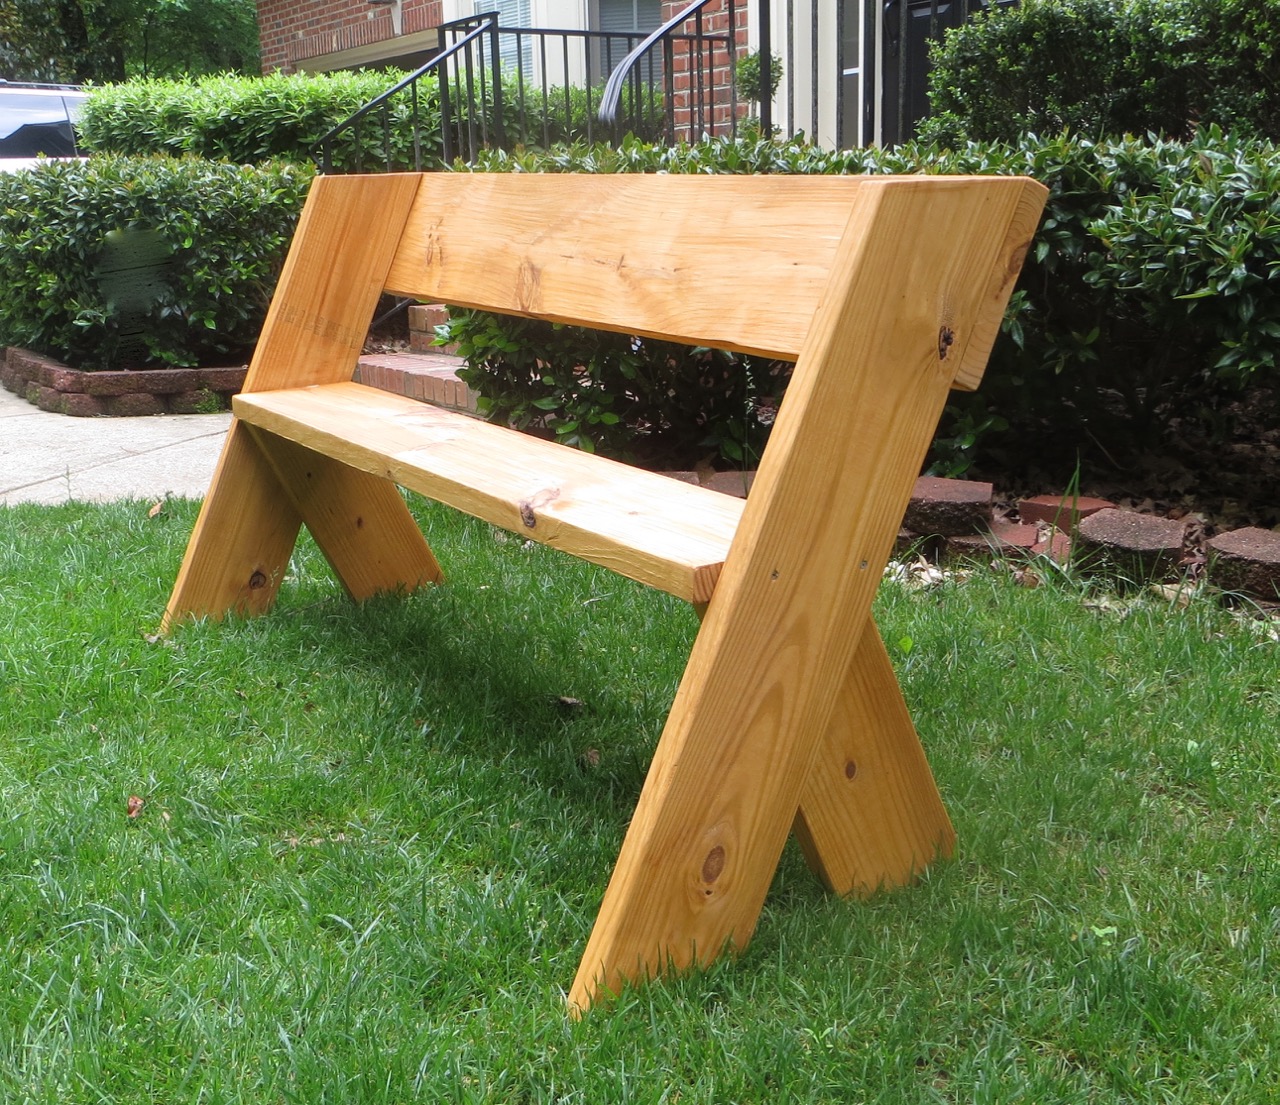 The Project Lady DIY Tutorial $16 Simple Outdoor Wood Bench